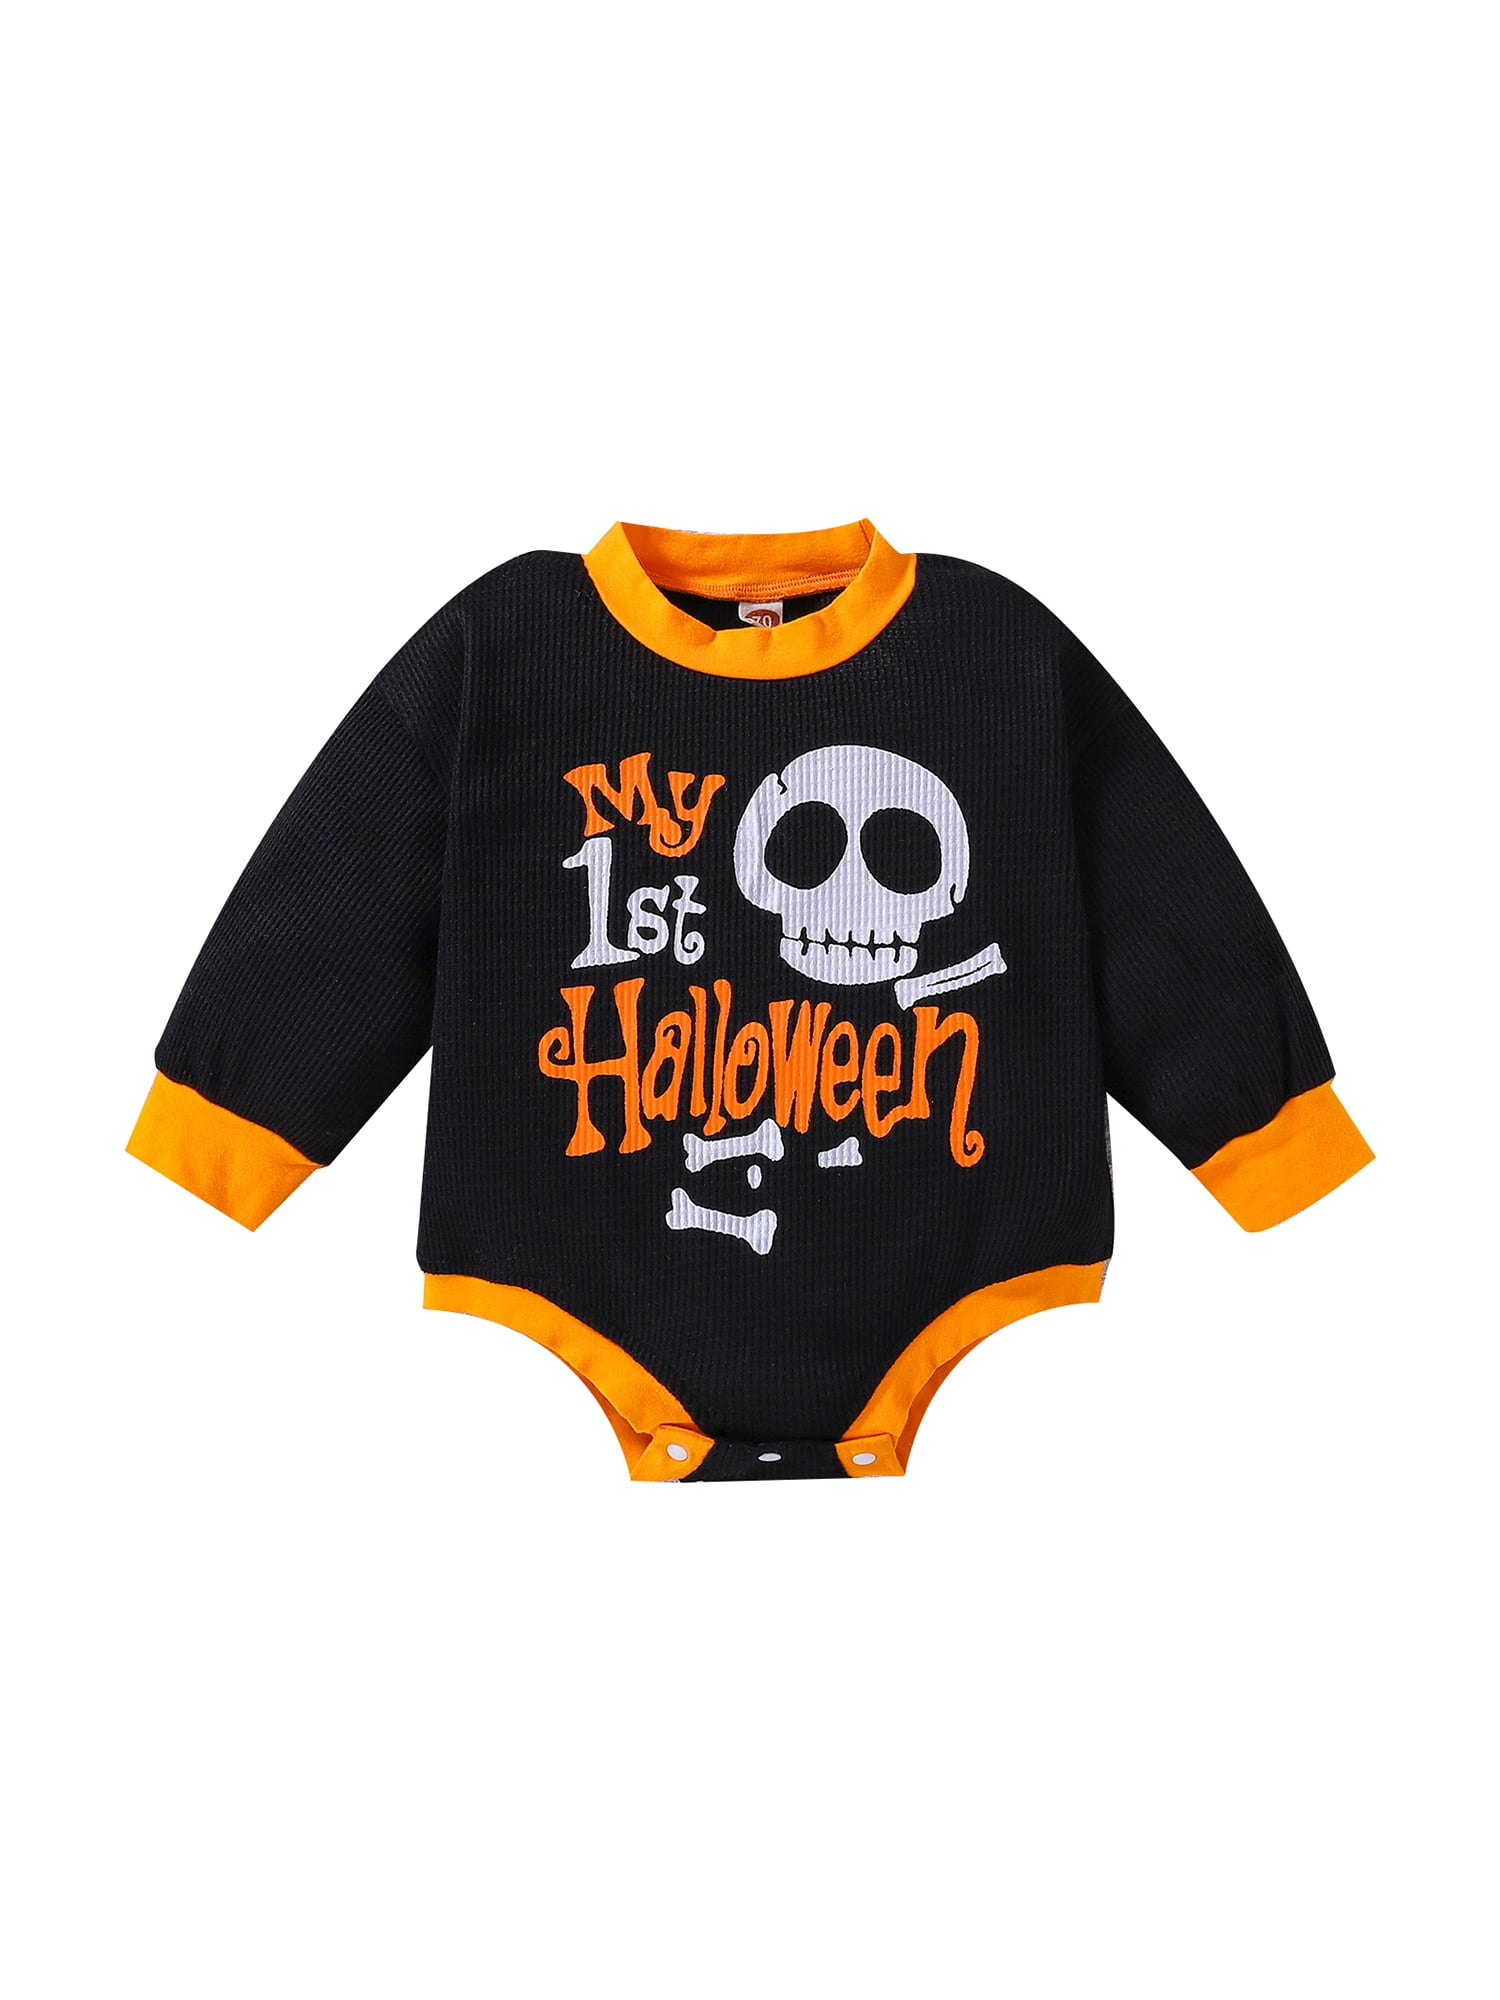 Long Pants Clothing Set for Kids Halloween Costume Outfits Gifts Boys Girls Unisex Clothes for 0-24 Months Weant Newborn Infant Toddler Baby Clothes Flower Skull Hoodies Sweatshirts 